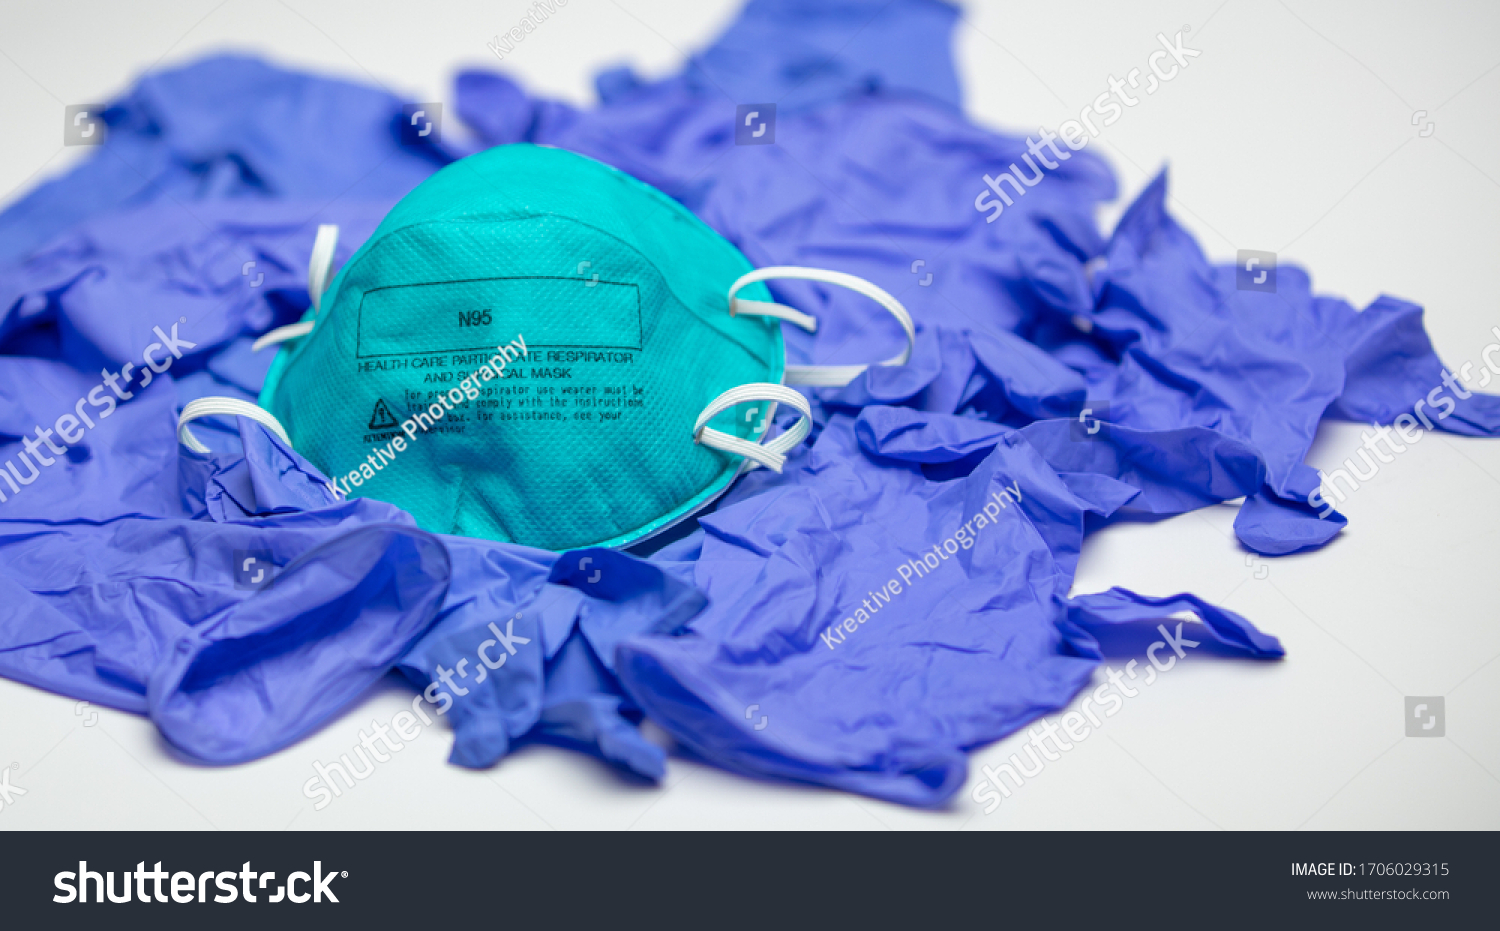 A turquoise N95 particulate respirator and surgical mask on top of many medical gloves. #1706029315